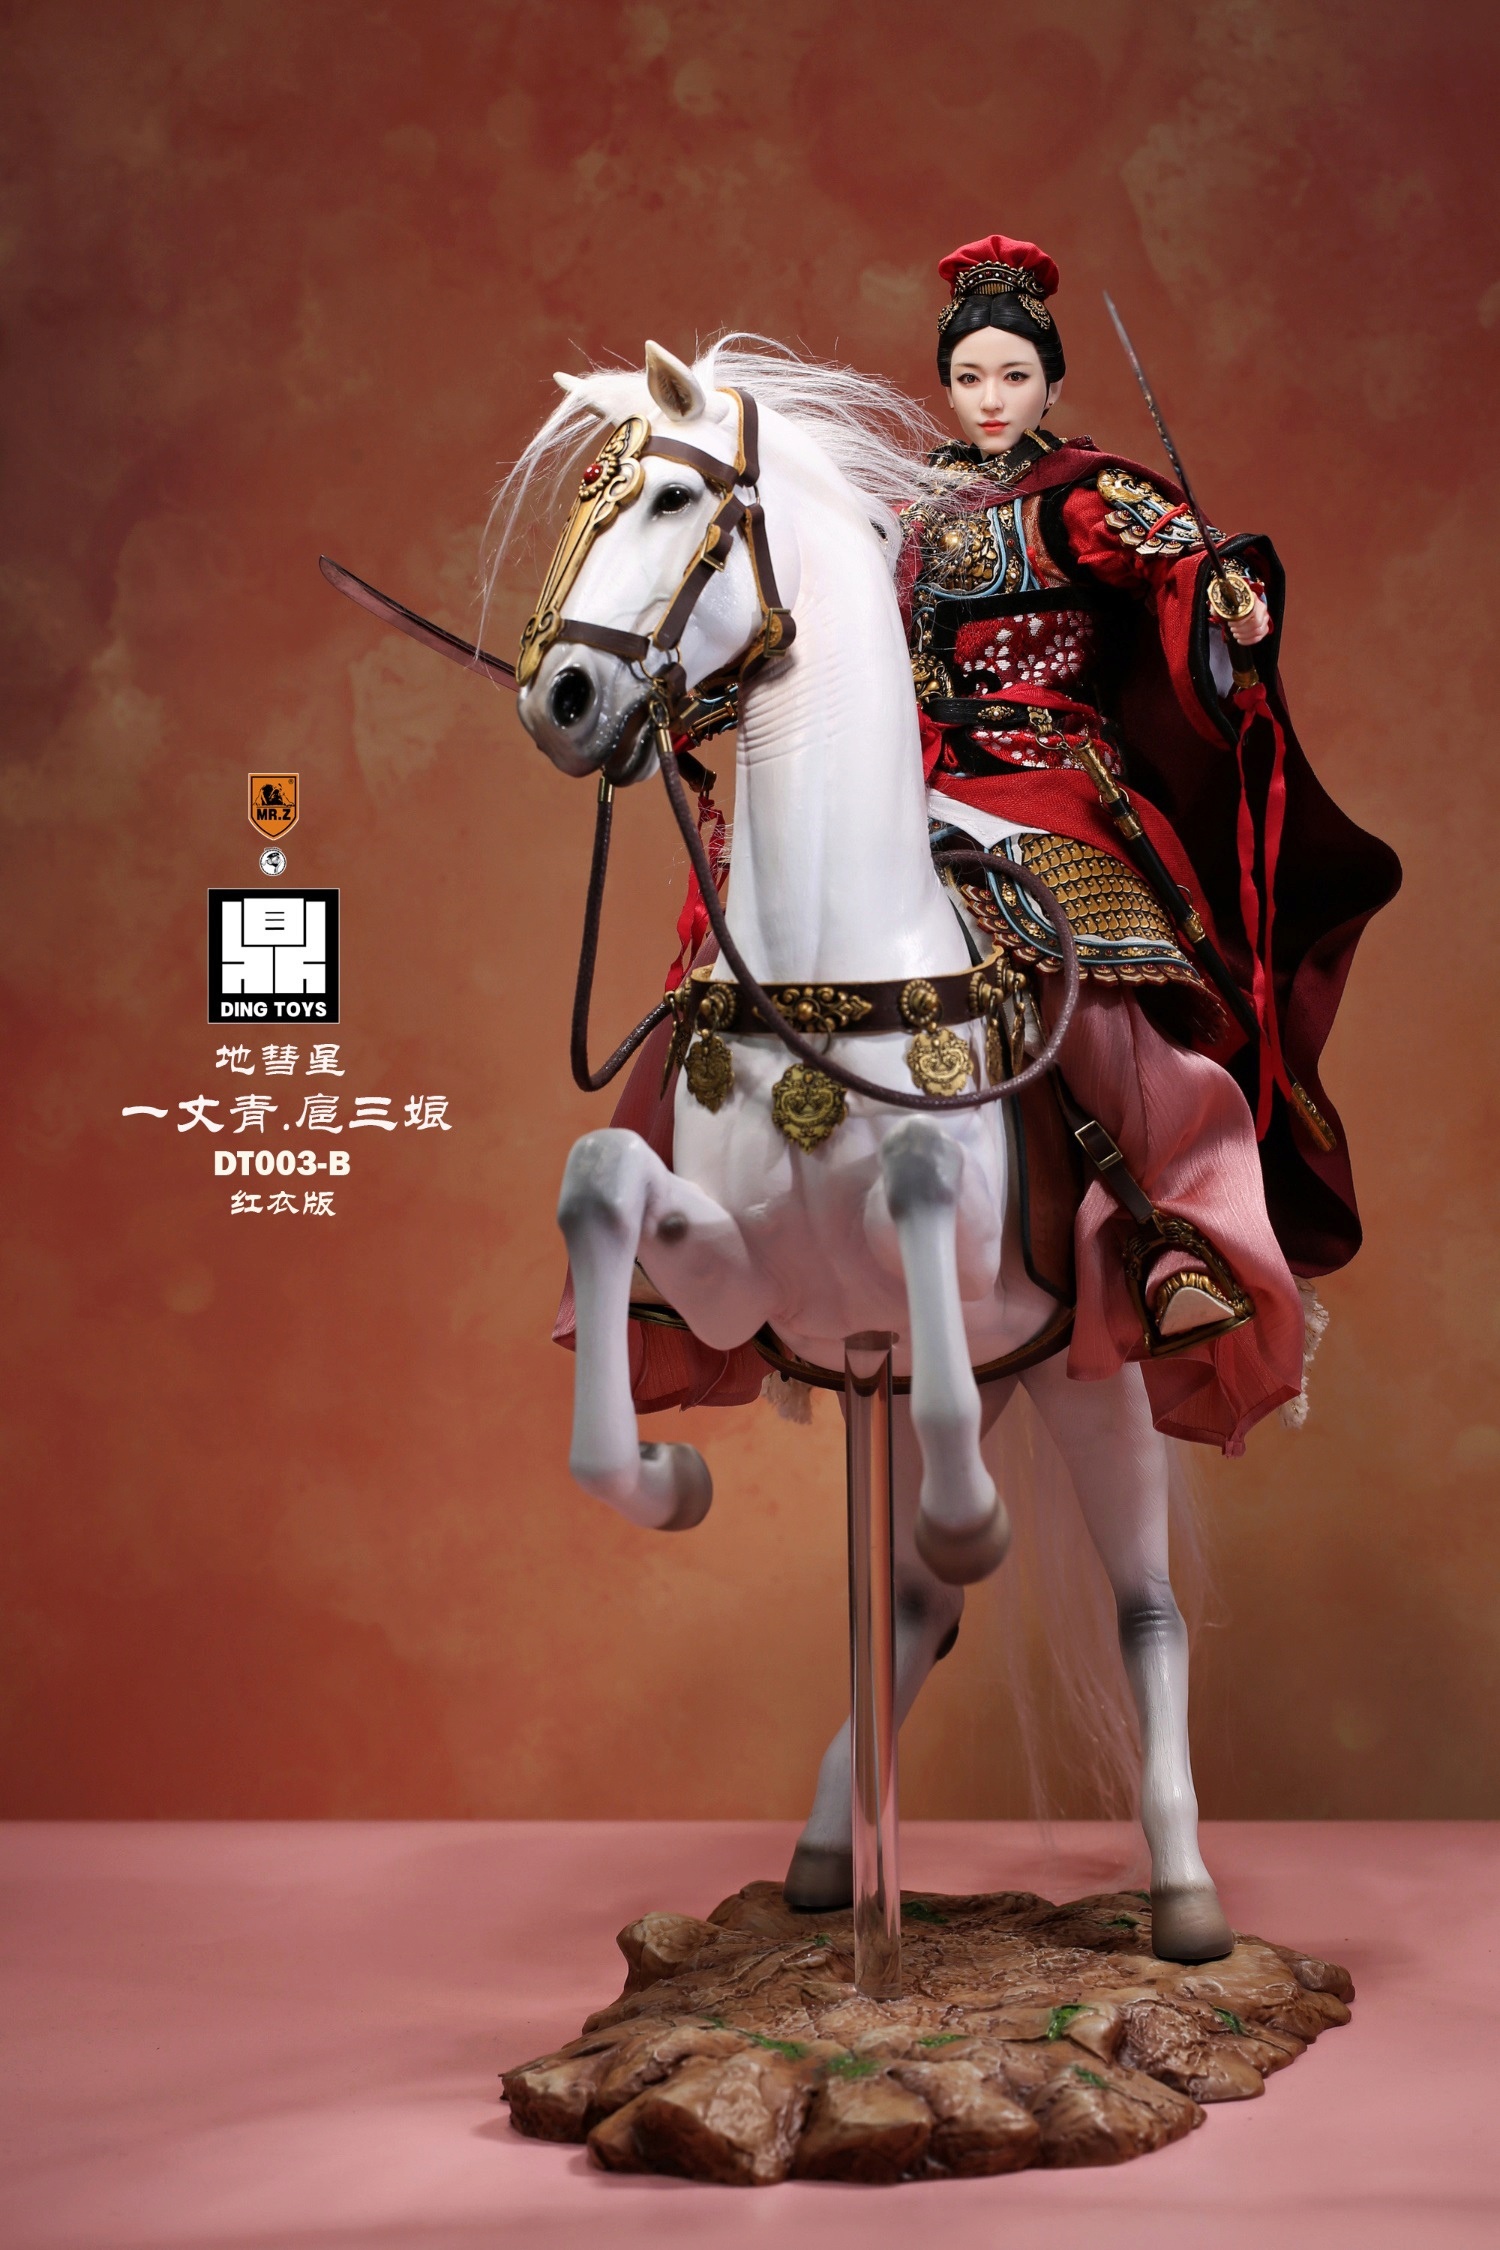 DingToys - NEW PRODUCT: Mr.Z x Ding Toys DT003 1/6 Scale 《Water Margin》Shiying Zhang (Green and Red versions), Horse (White) 4021